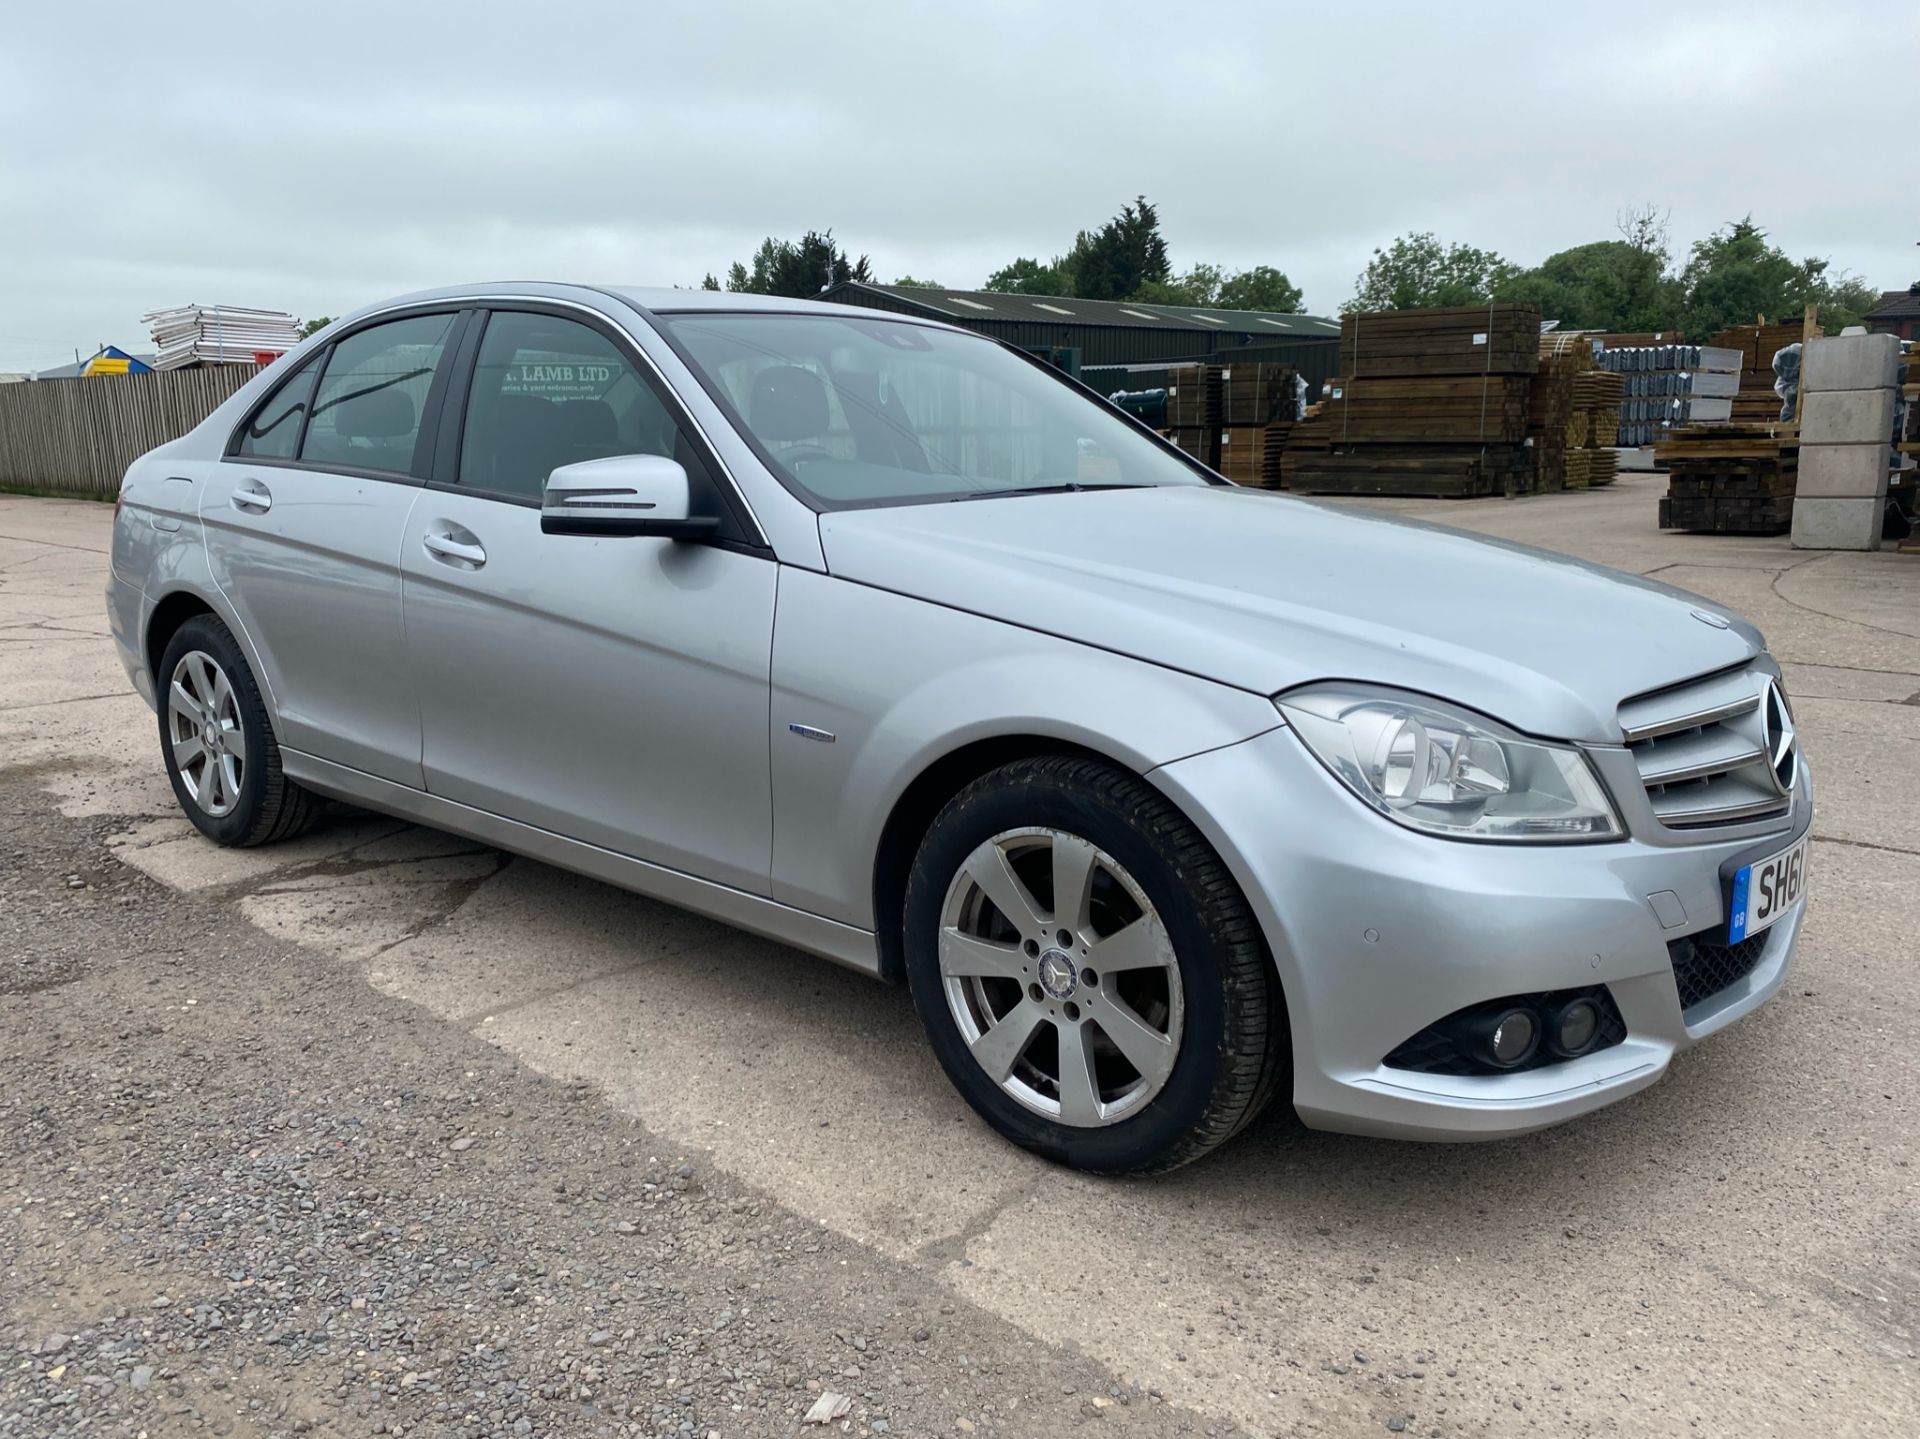 MERCEDES C220 CDI "BLUE EFFICIENCY" AUTO SPECIAL EQUIPMENT SALOON - 2012 MODEL - LOW MILES - LEATHER